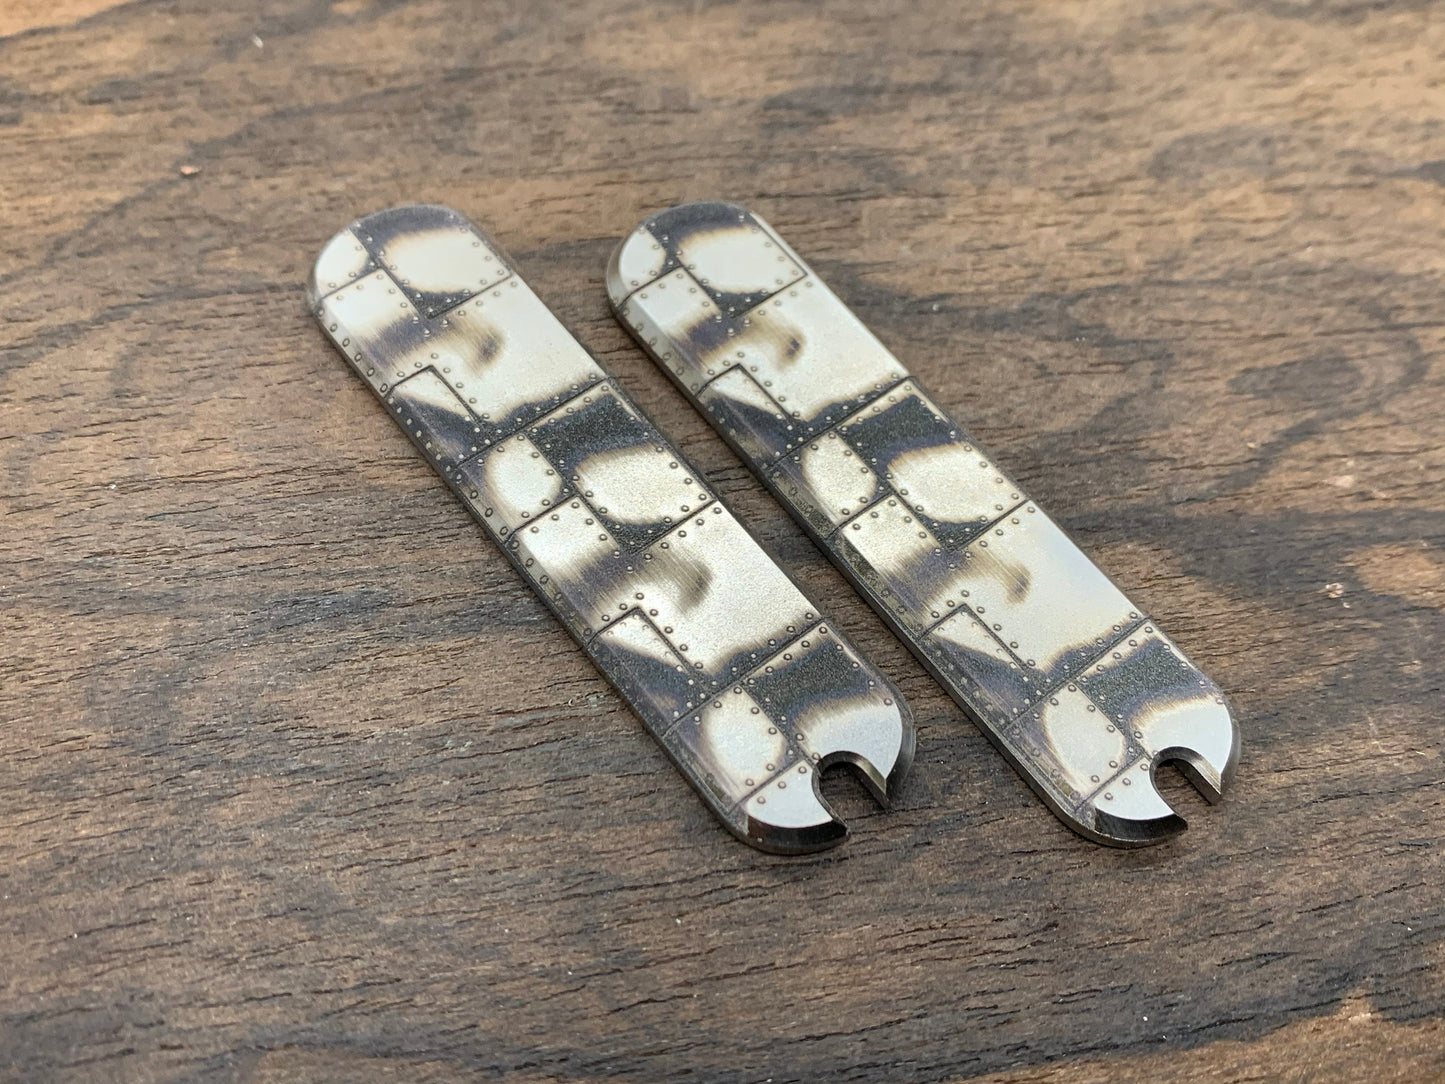 RIVETED AIRPLANE 58mm Titanium Scales for Swiss Army SAK